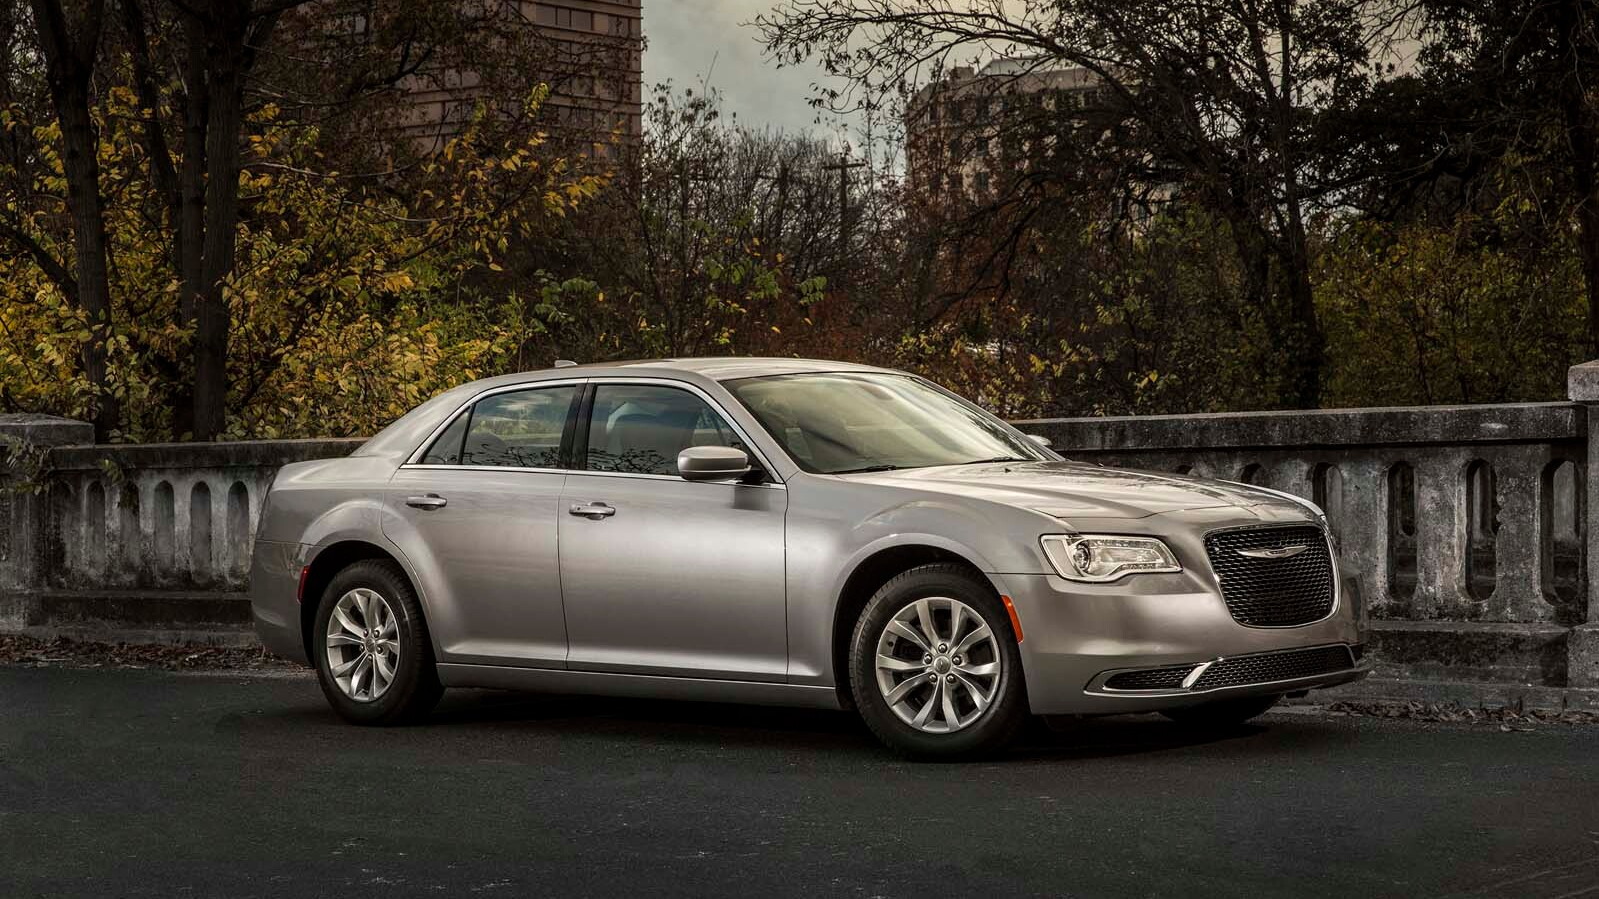 2016 Chrysler 300 Gets 90th Anniversary Edition